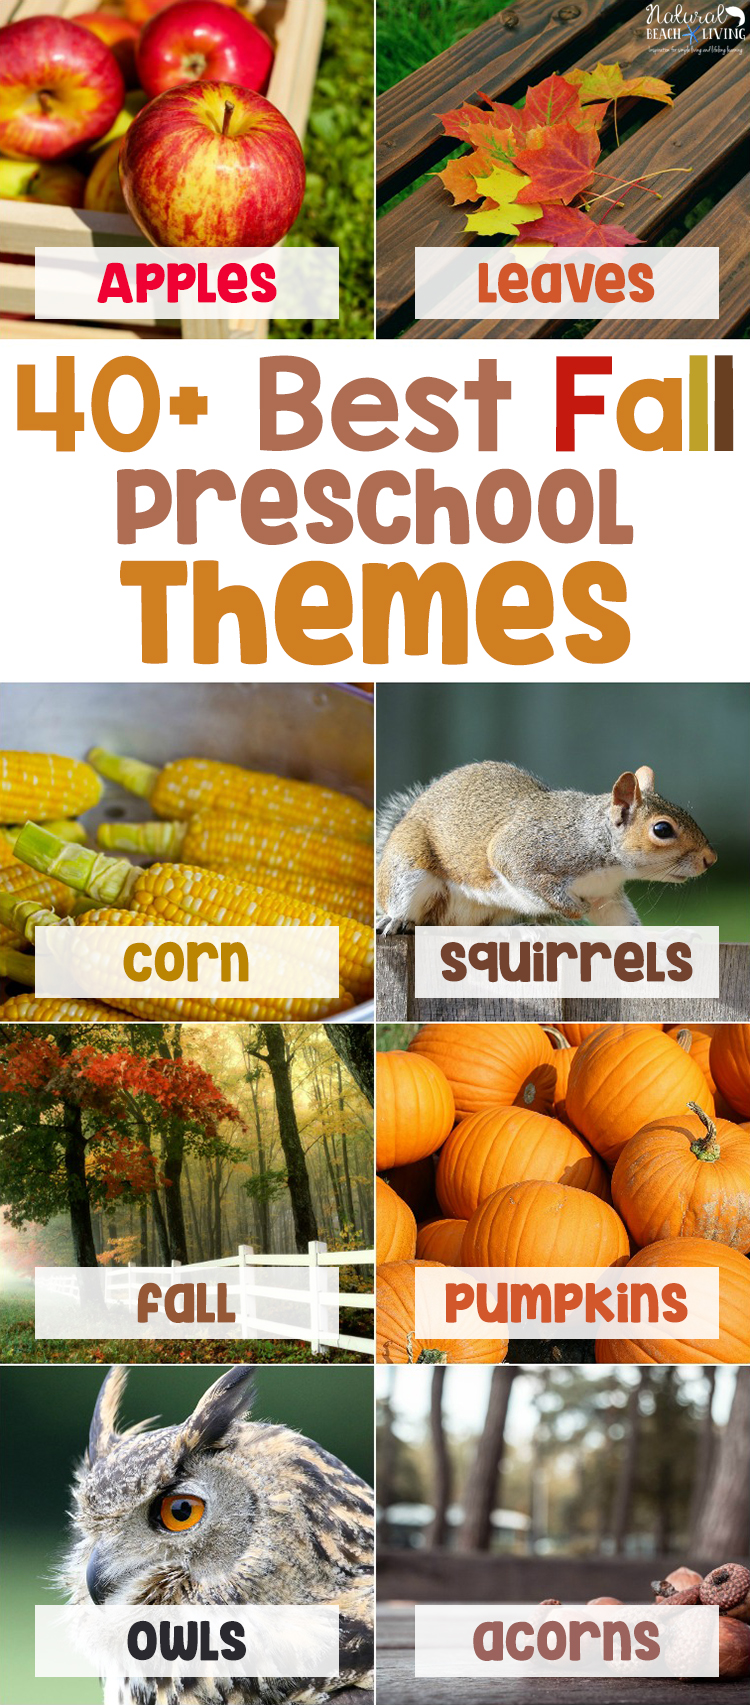 20+ September Preschool Themes with Lesson Plans and Activities, Free Printable List of Themes for Preschool, Preschool Weekly Themes and Activities for September, Plus, This September Preschool Themes Page is full of activities for science, math, crafts, learning about apples, the alphabet, autumn, hands-on activities, language, writing and more.